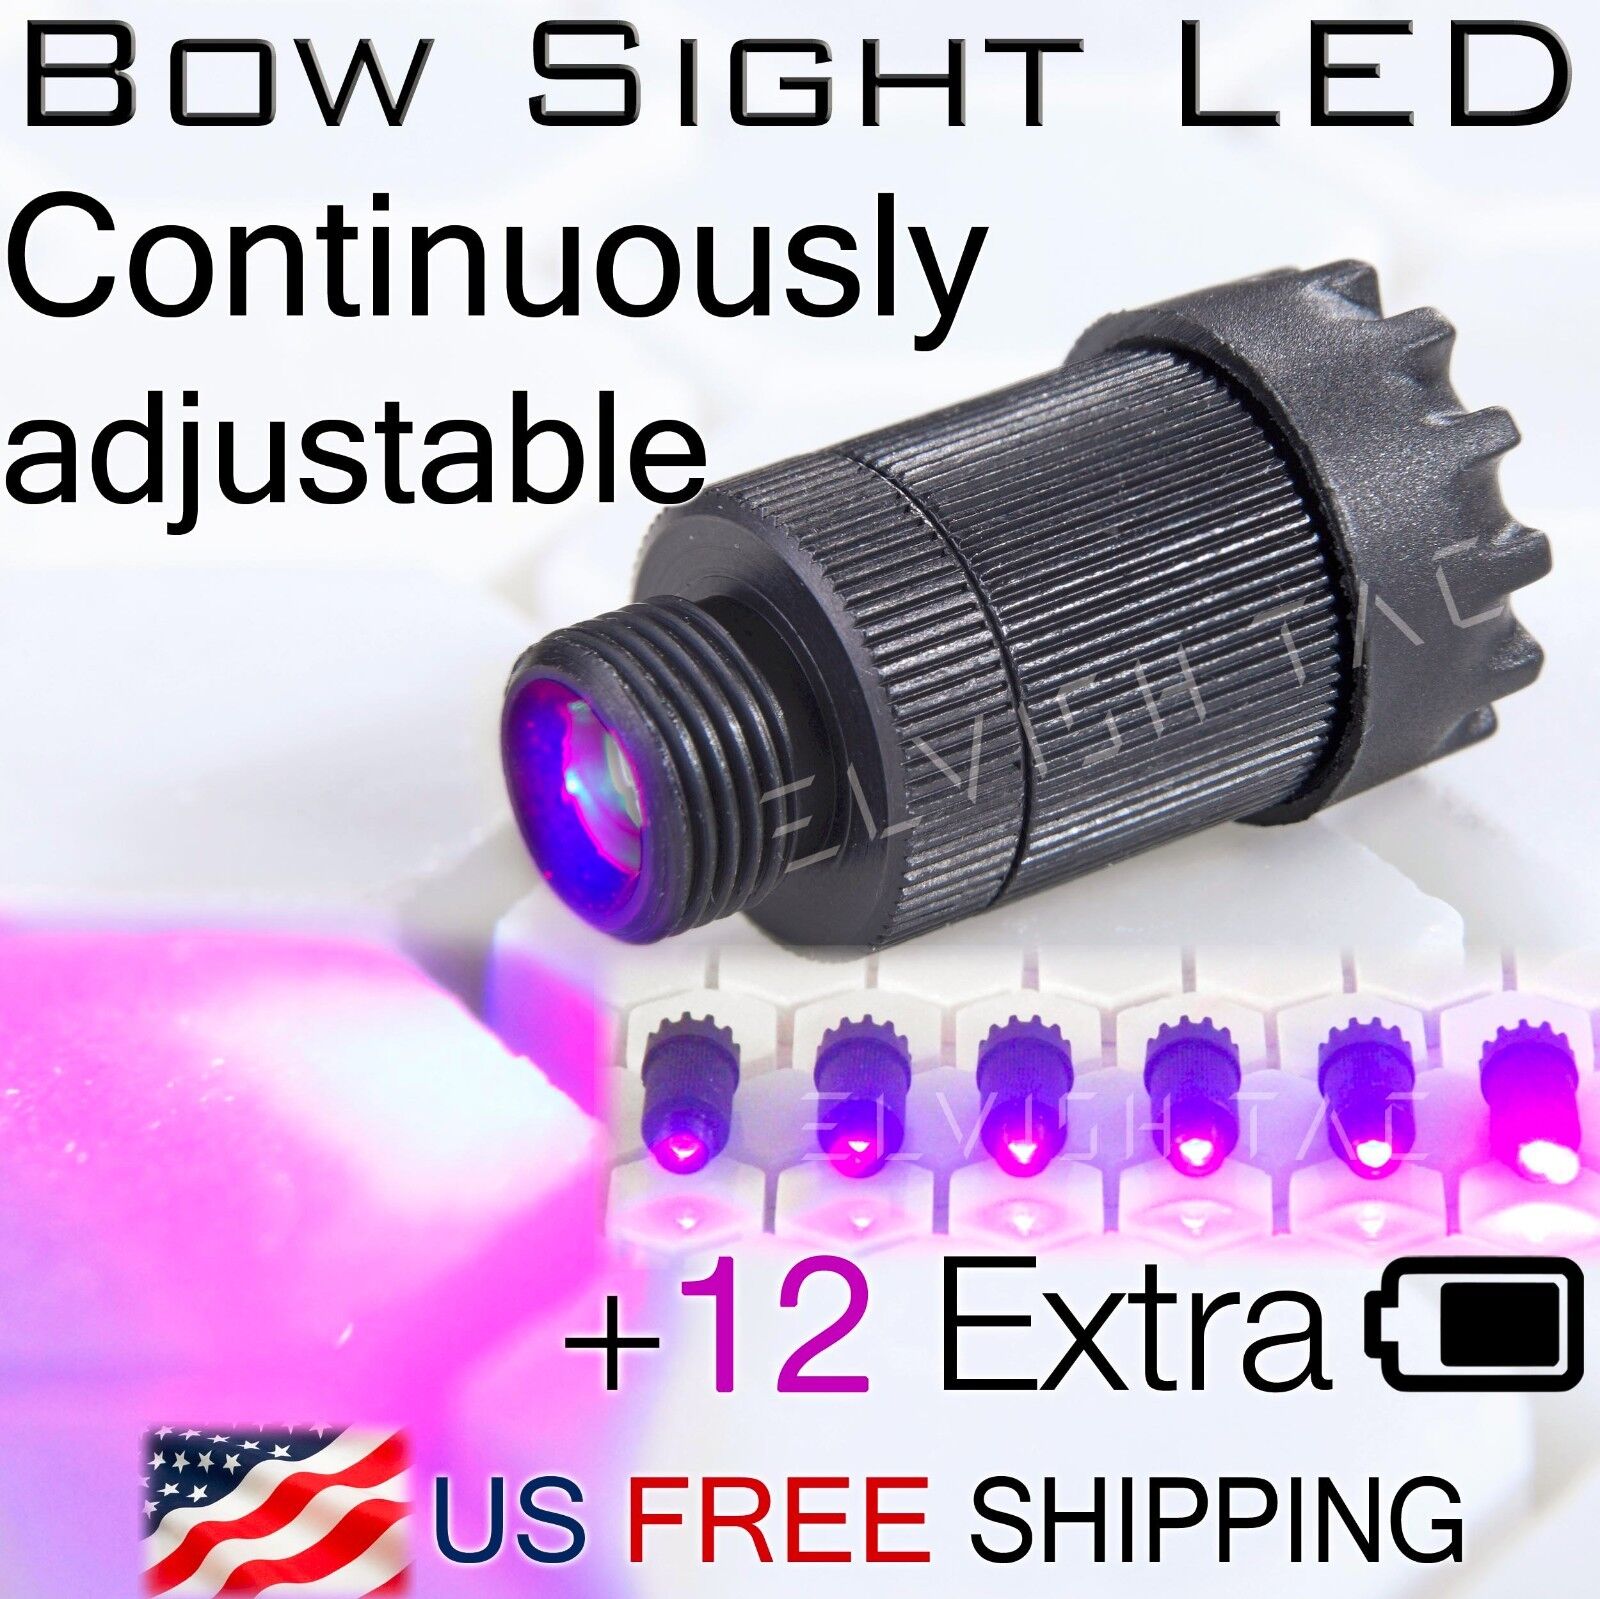 Compound Bow Sight LED Light Continuous Adjustable Fits 3/8-